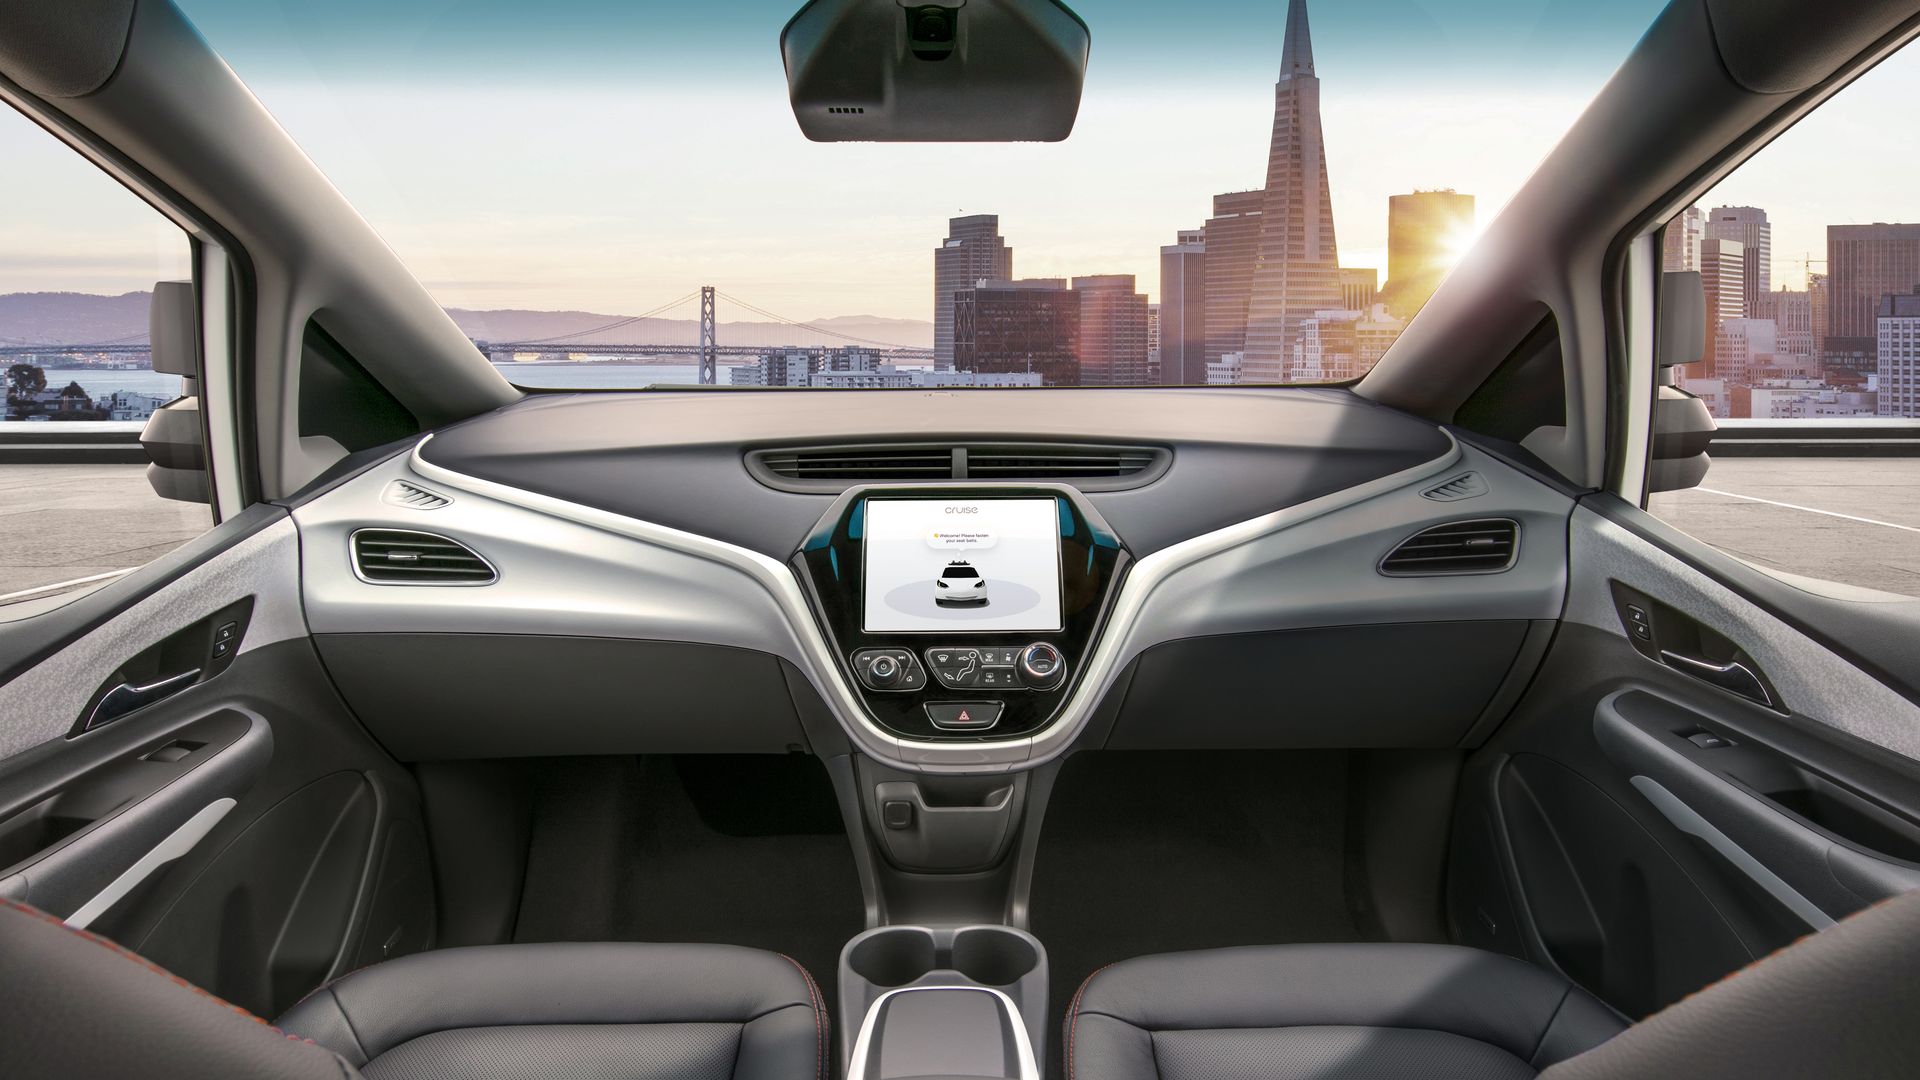 Image of interior of Chevrolet Cruise self-driving car, with no steering wheel or pedals.